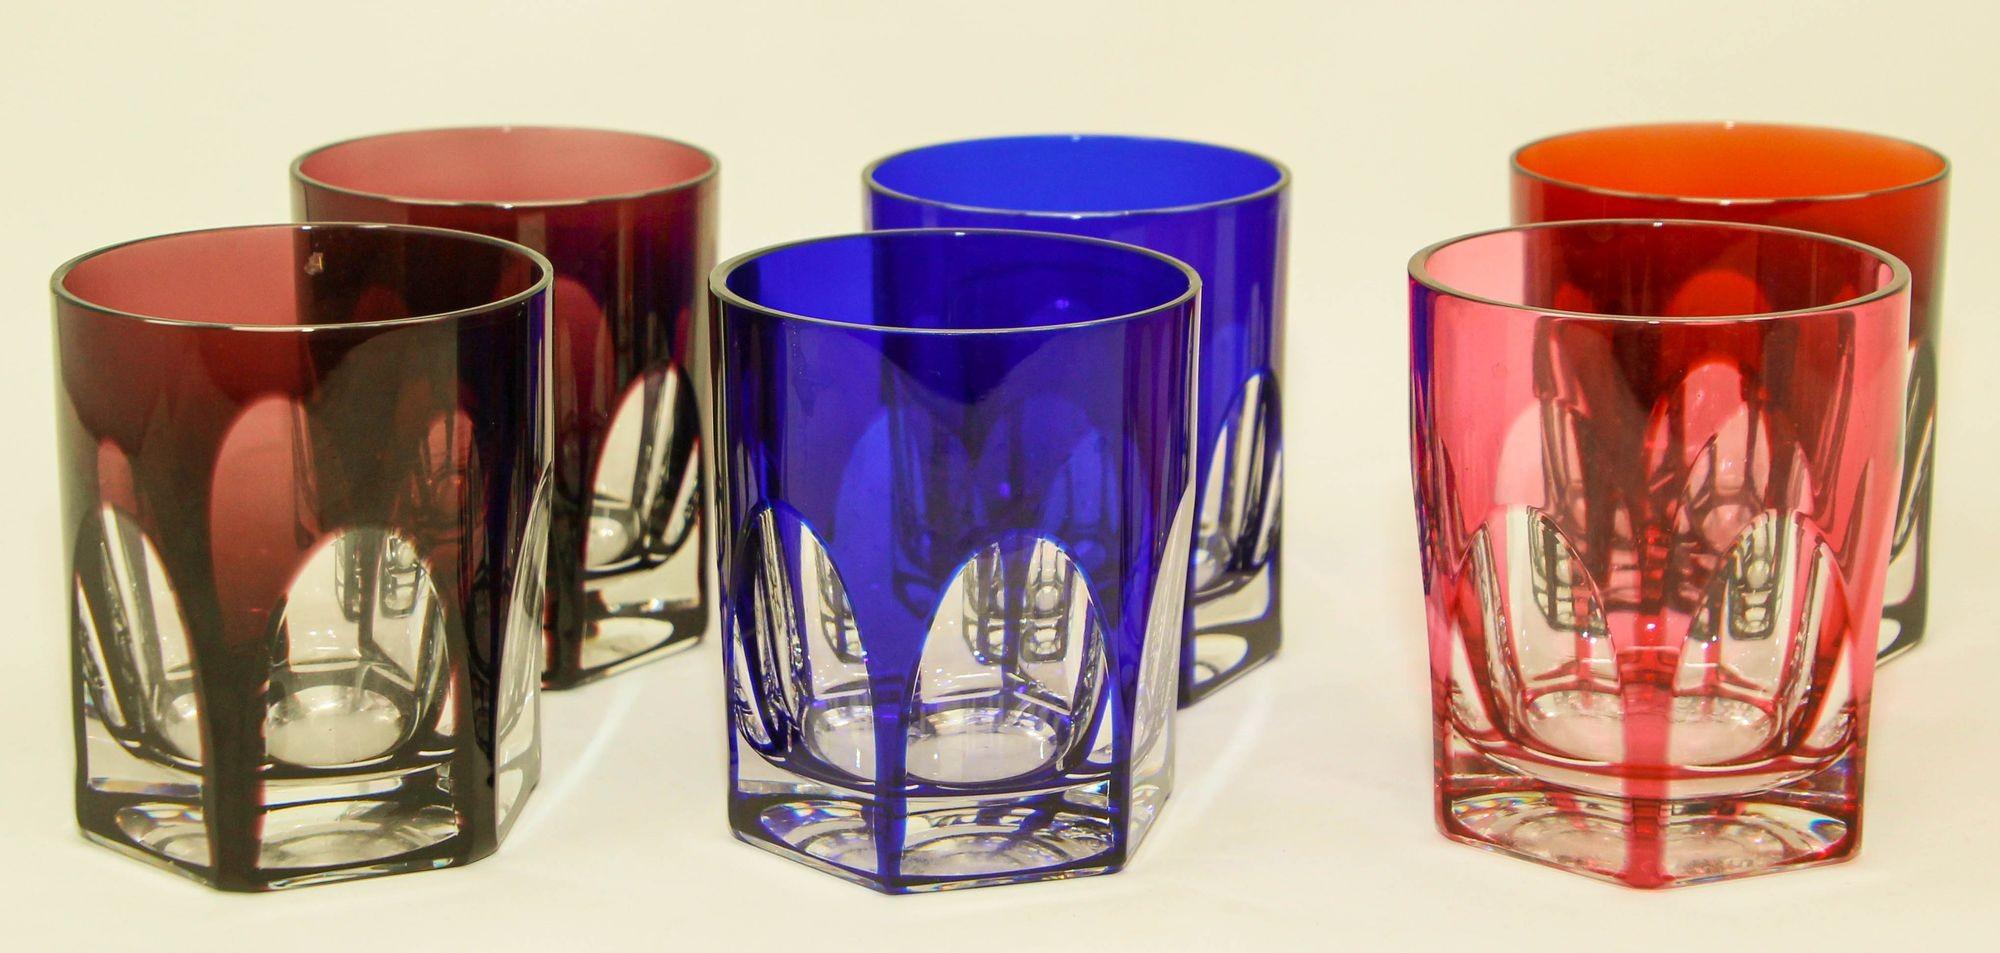 Harlequin set of 6 Val Saint Lambert colored crystal tumblers barware drinking glasses
A striking set of six Mid 20th Century Belgian colored crystal tumblers by Val Saint Lambert.
Bohemian Czech crystal bar Barware cut to clear whisky old